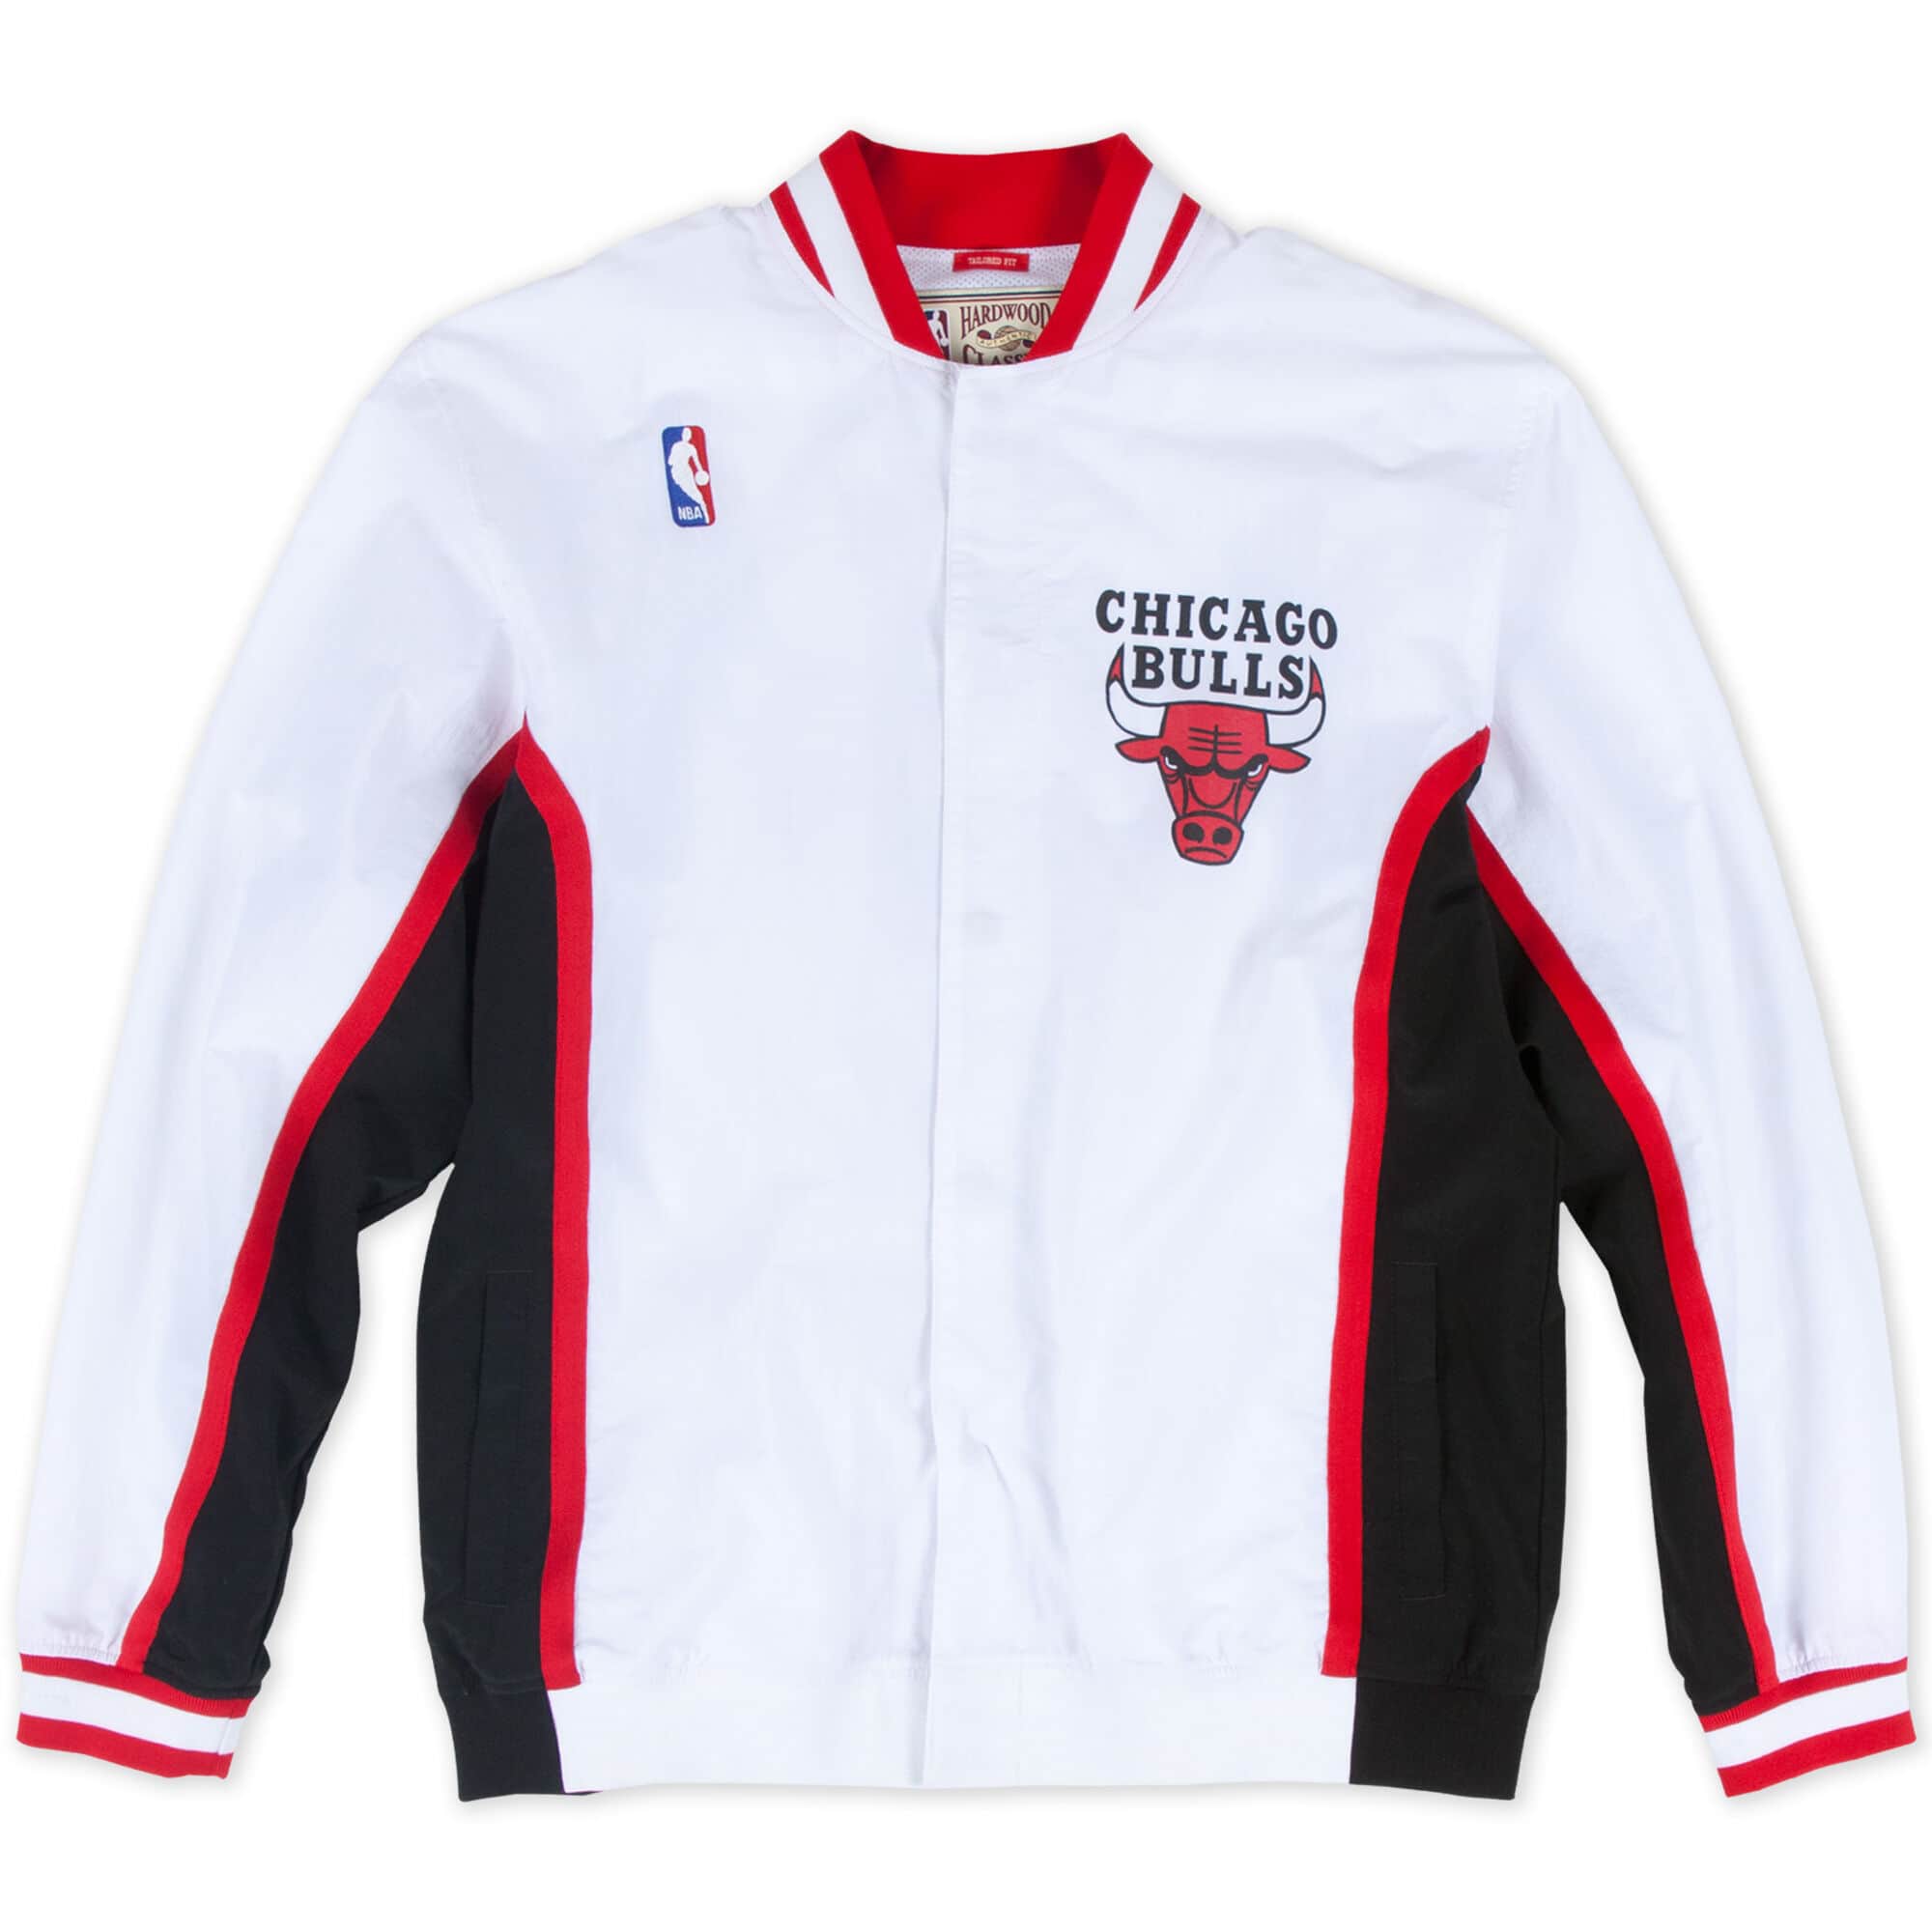 MITCHELL & NESS The Chicago Bulls Authentic Warm Up Jacket in White  418T3A9AGSWIH-WHT - PLNDR